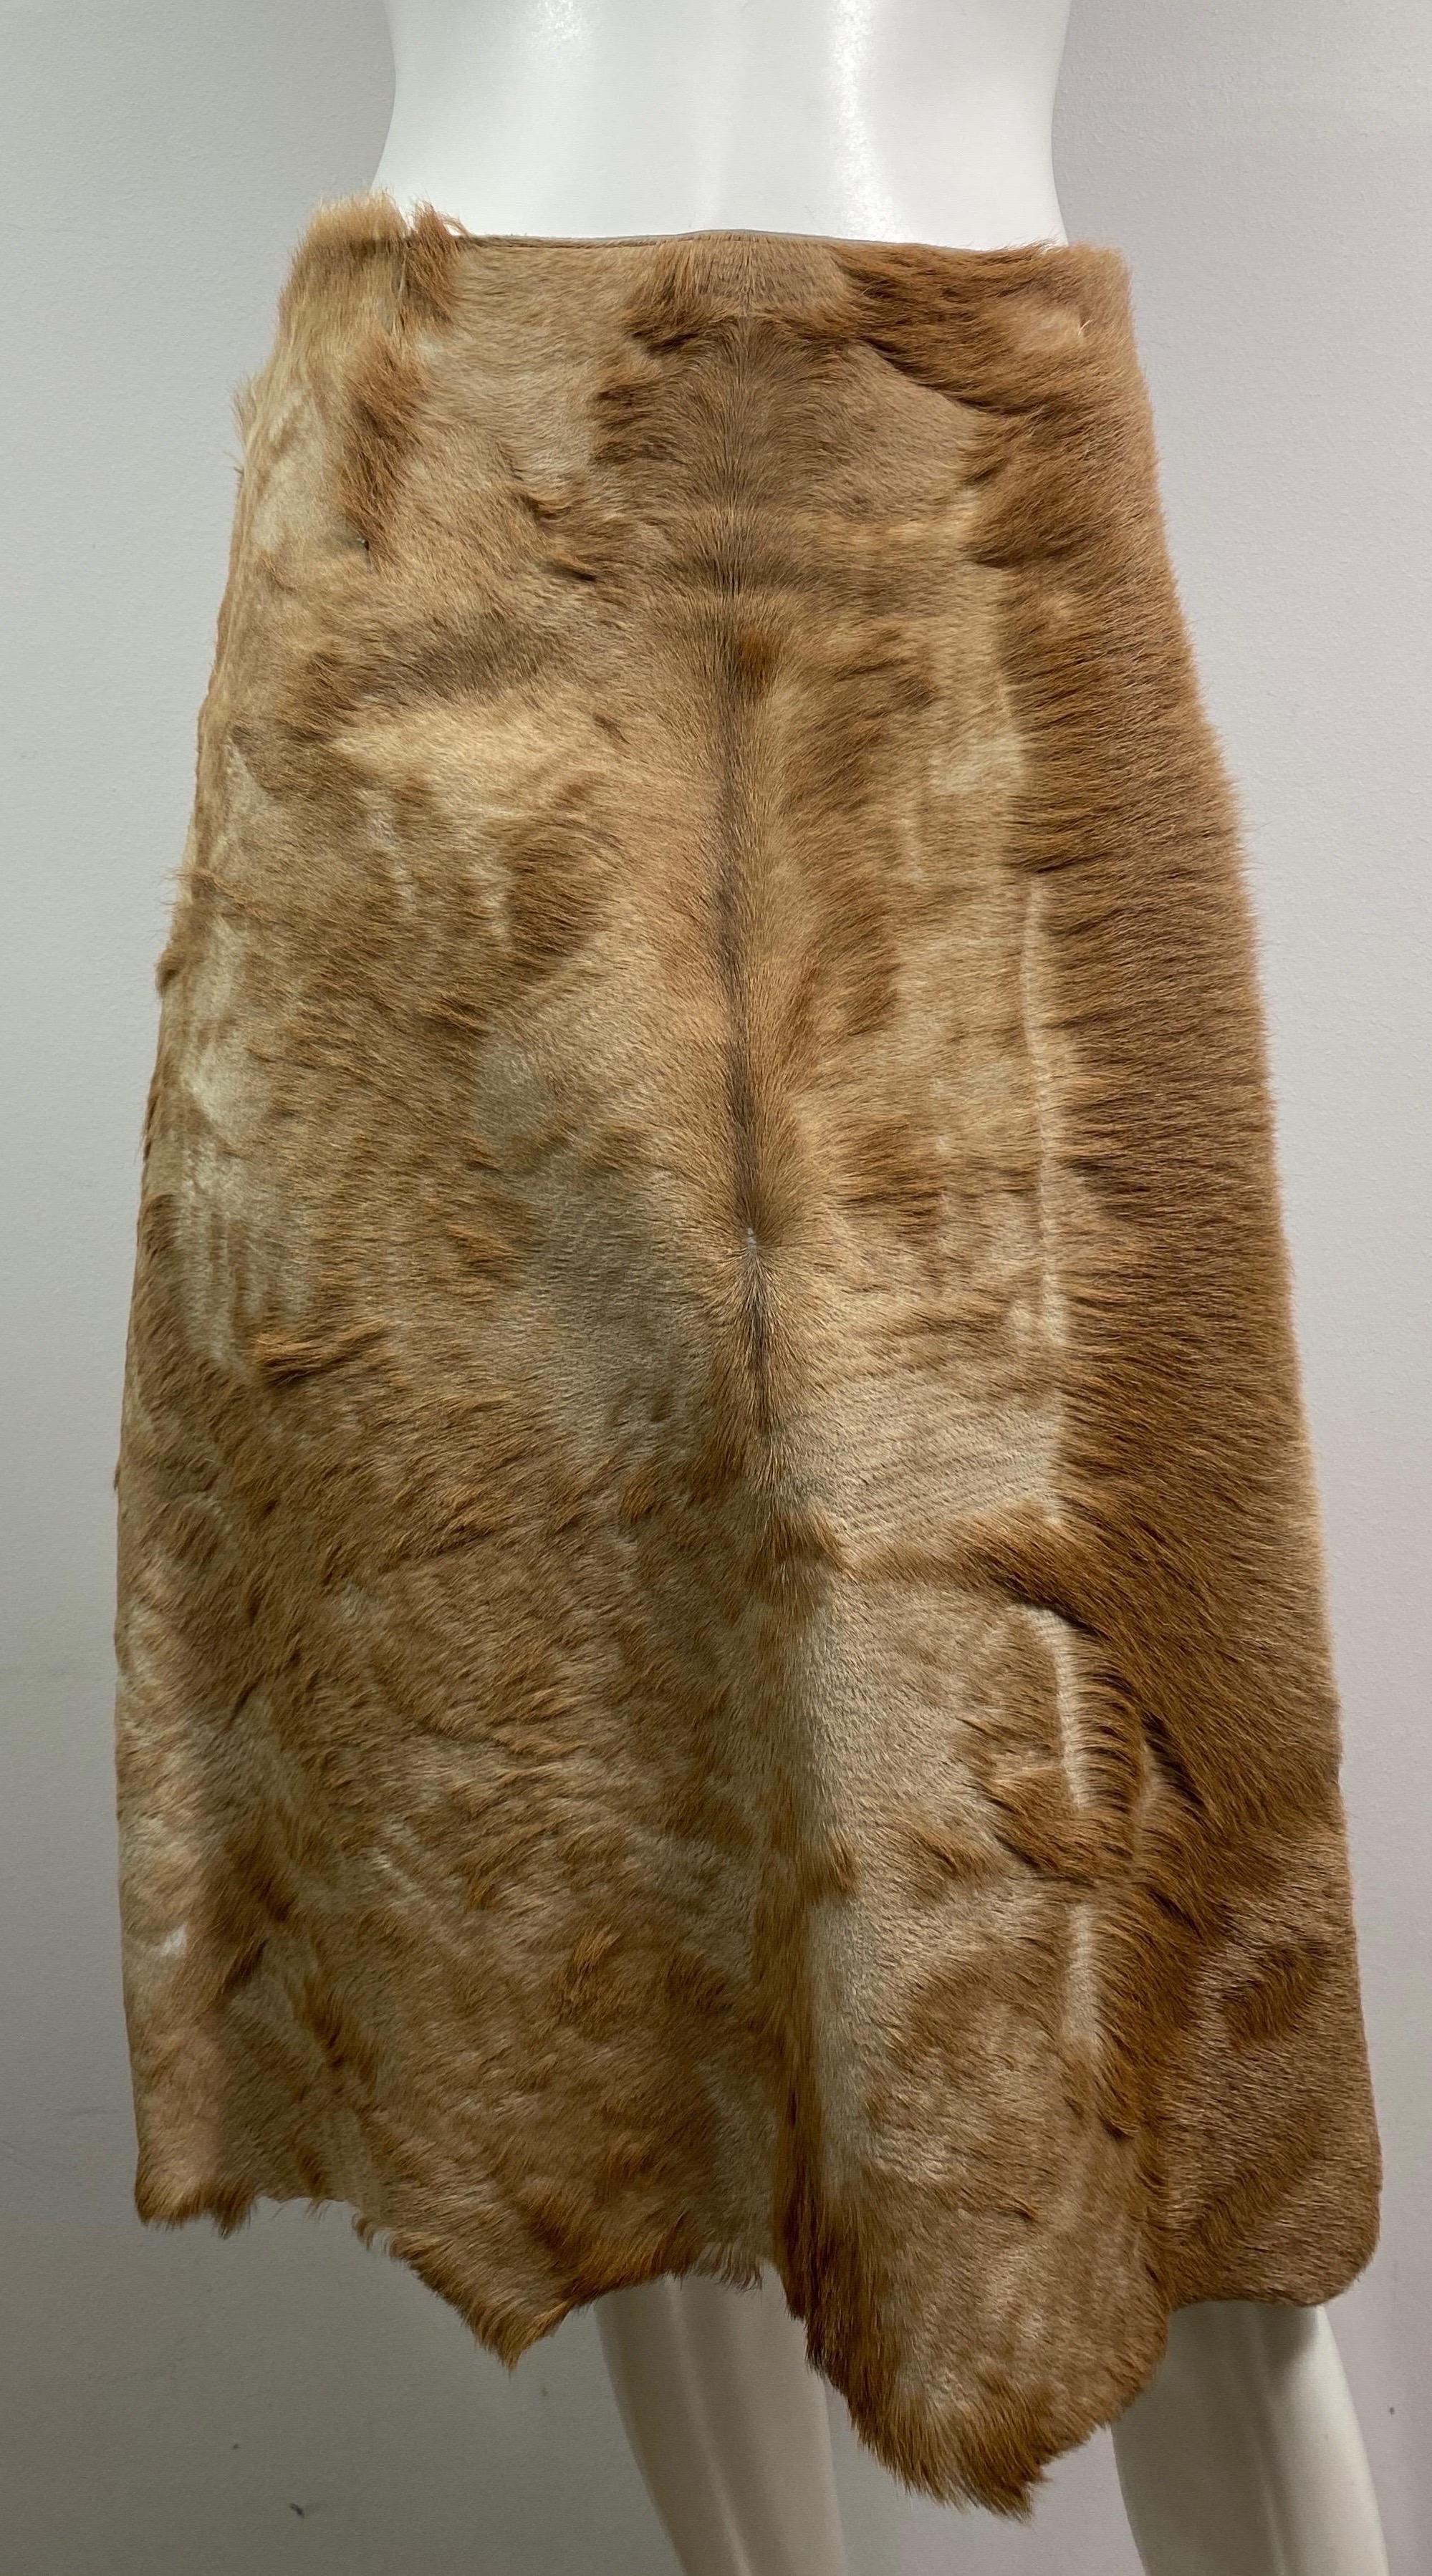 Fendi Runway Fall 1999 Pony Hair Leather Skirt -Size 42. This Karl Lagerfeld designed runway piece was look 70 in the Fendi Fall 1999 runway show in Milan. The Skirt is a tan pony haired leather with an uneven scalloped like hemline, silk lined, A